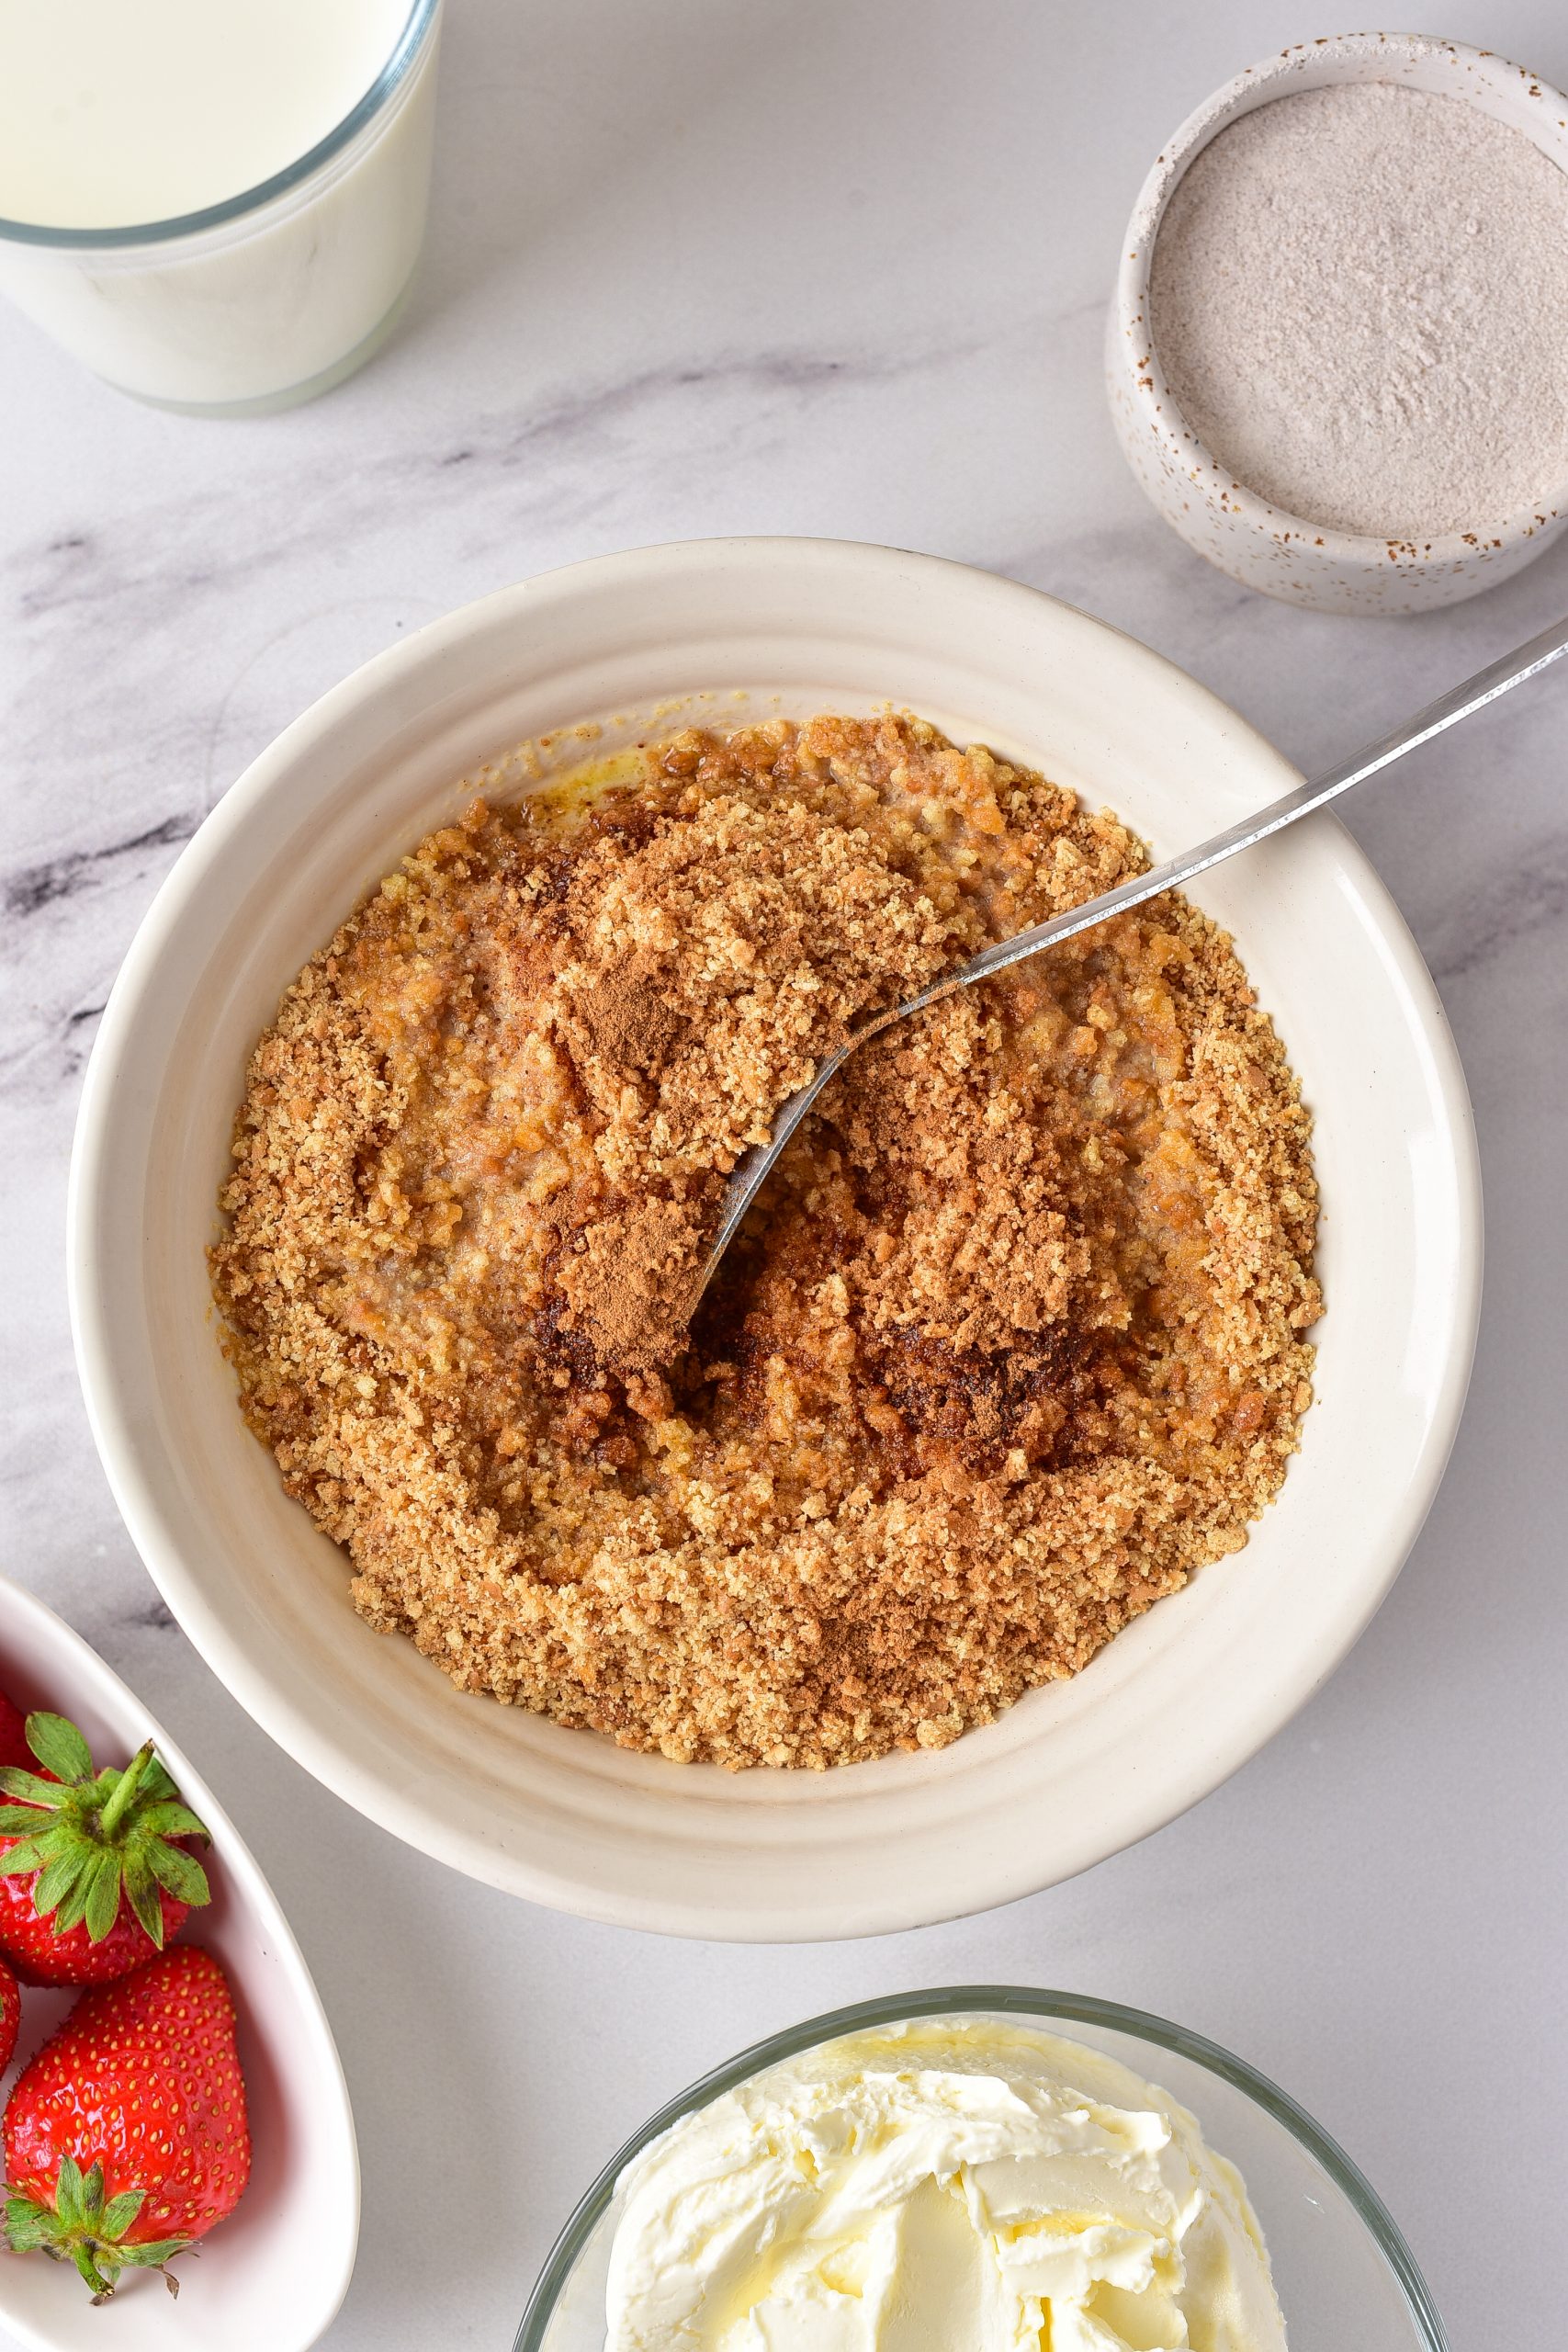 Combine the melted butter, cinnamon, nutmeg, and graham cracker crumbs in a bowl.